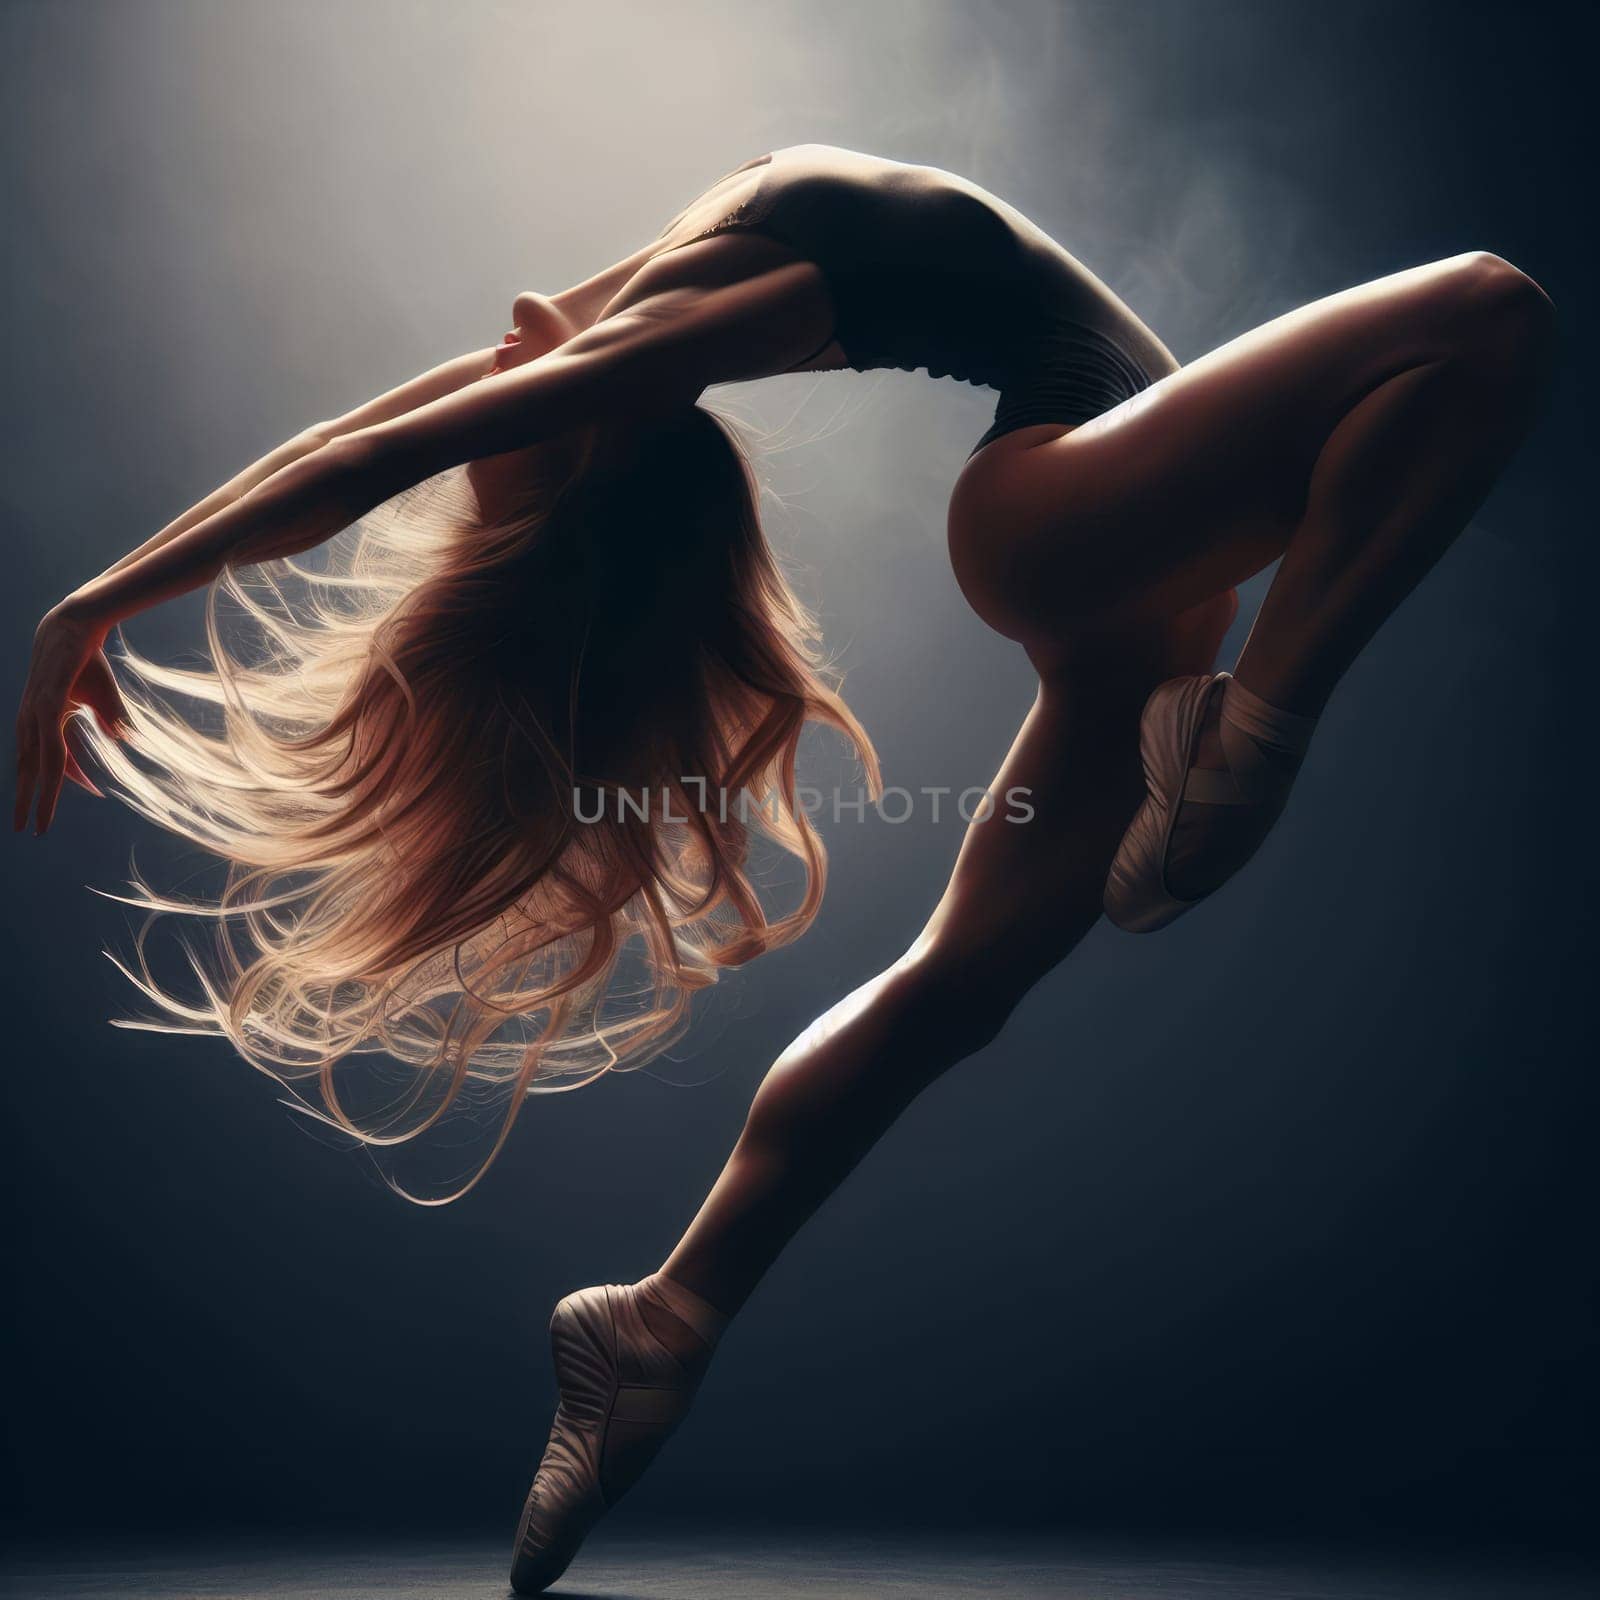 Female dancer in a black leotard and ballet slippers, mid-dance with her hair flying. Ballerina dancing, background is dark and the lighting is dramatic